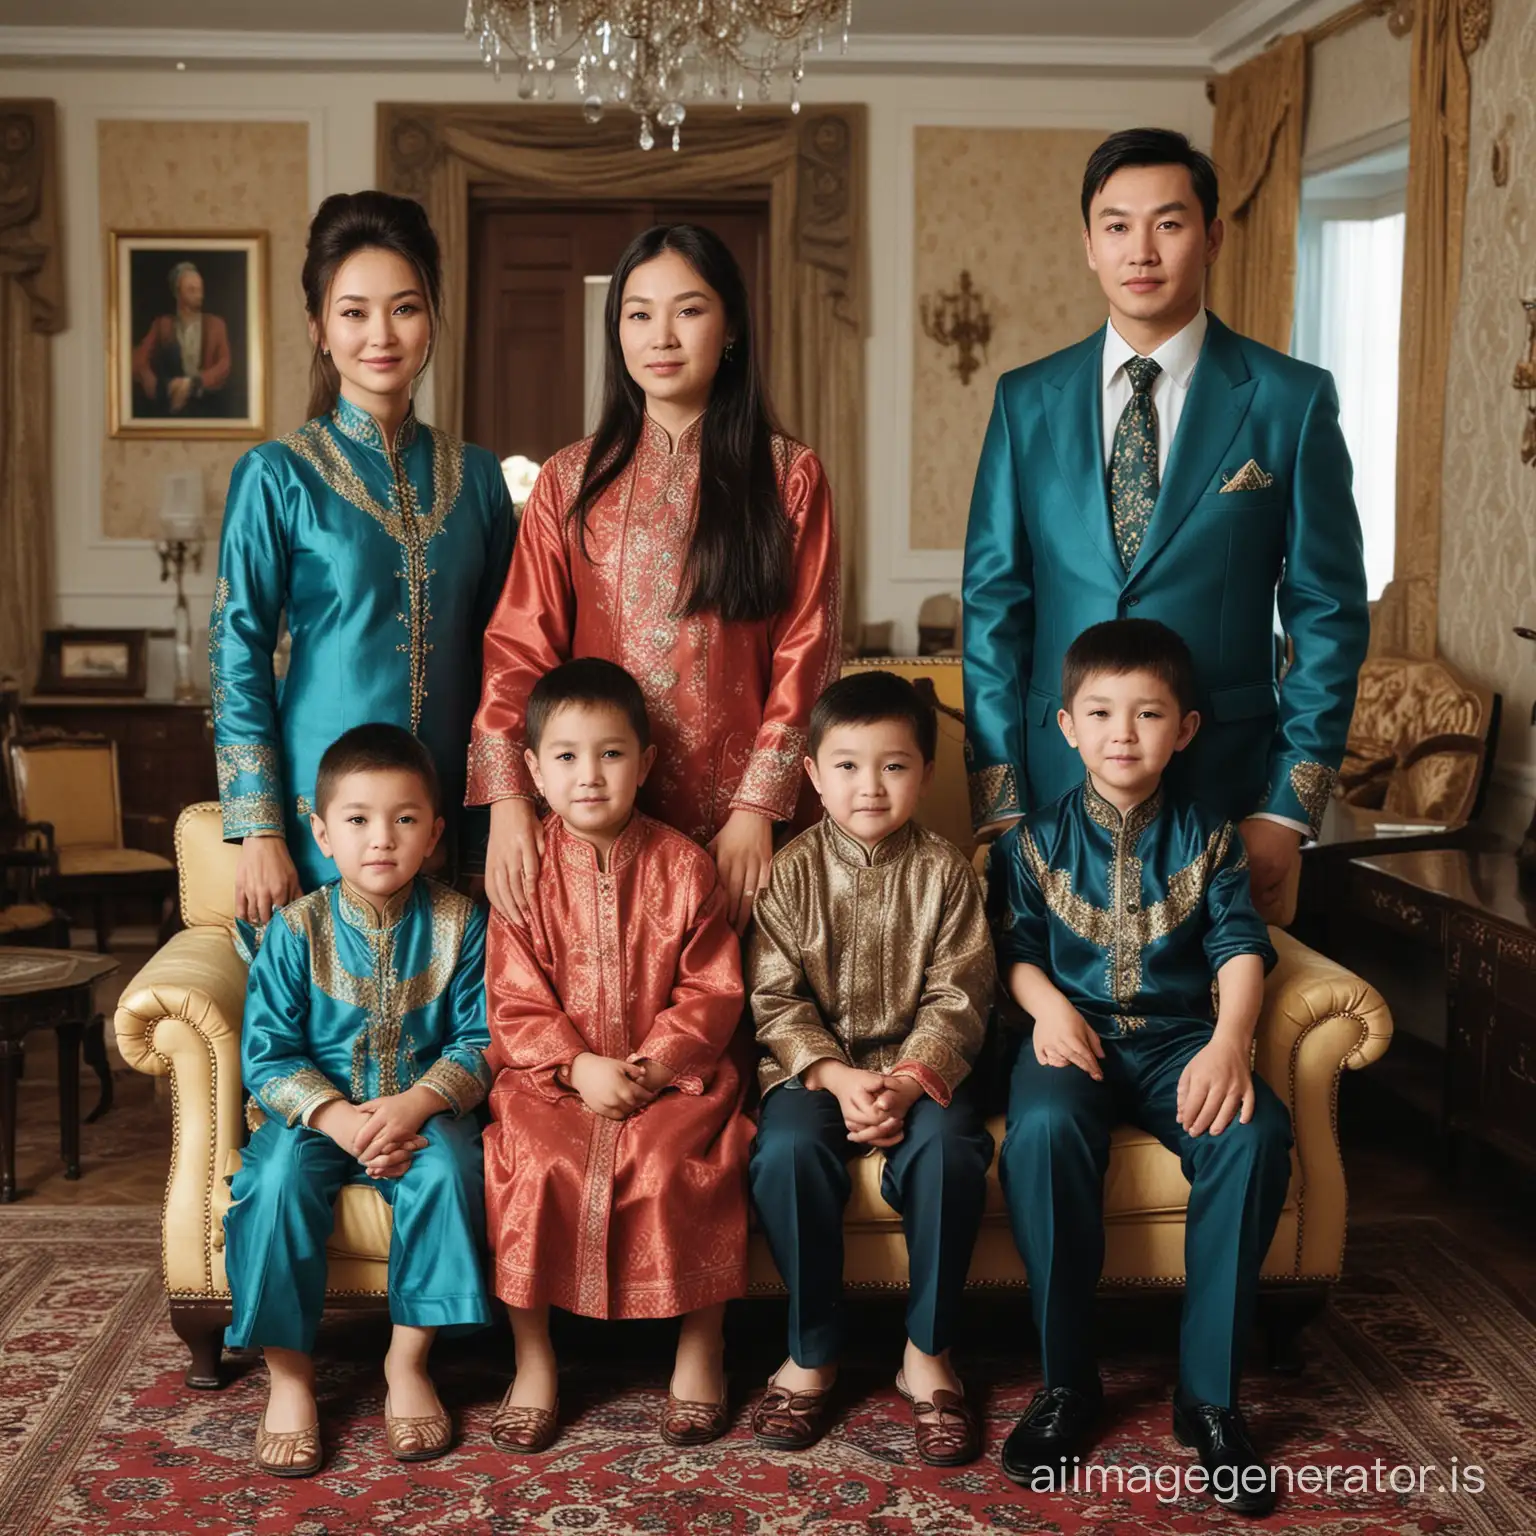 upper middle class Kazakh family, who are loyal to family bonds. and they are cool, classy, posh in their house.